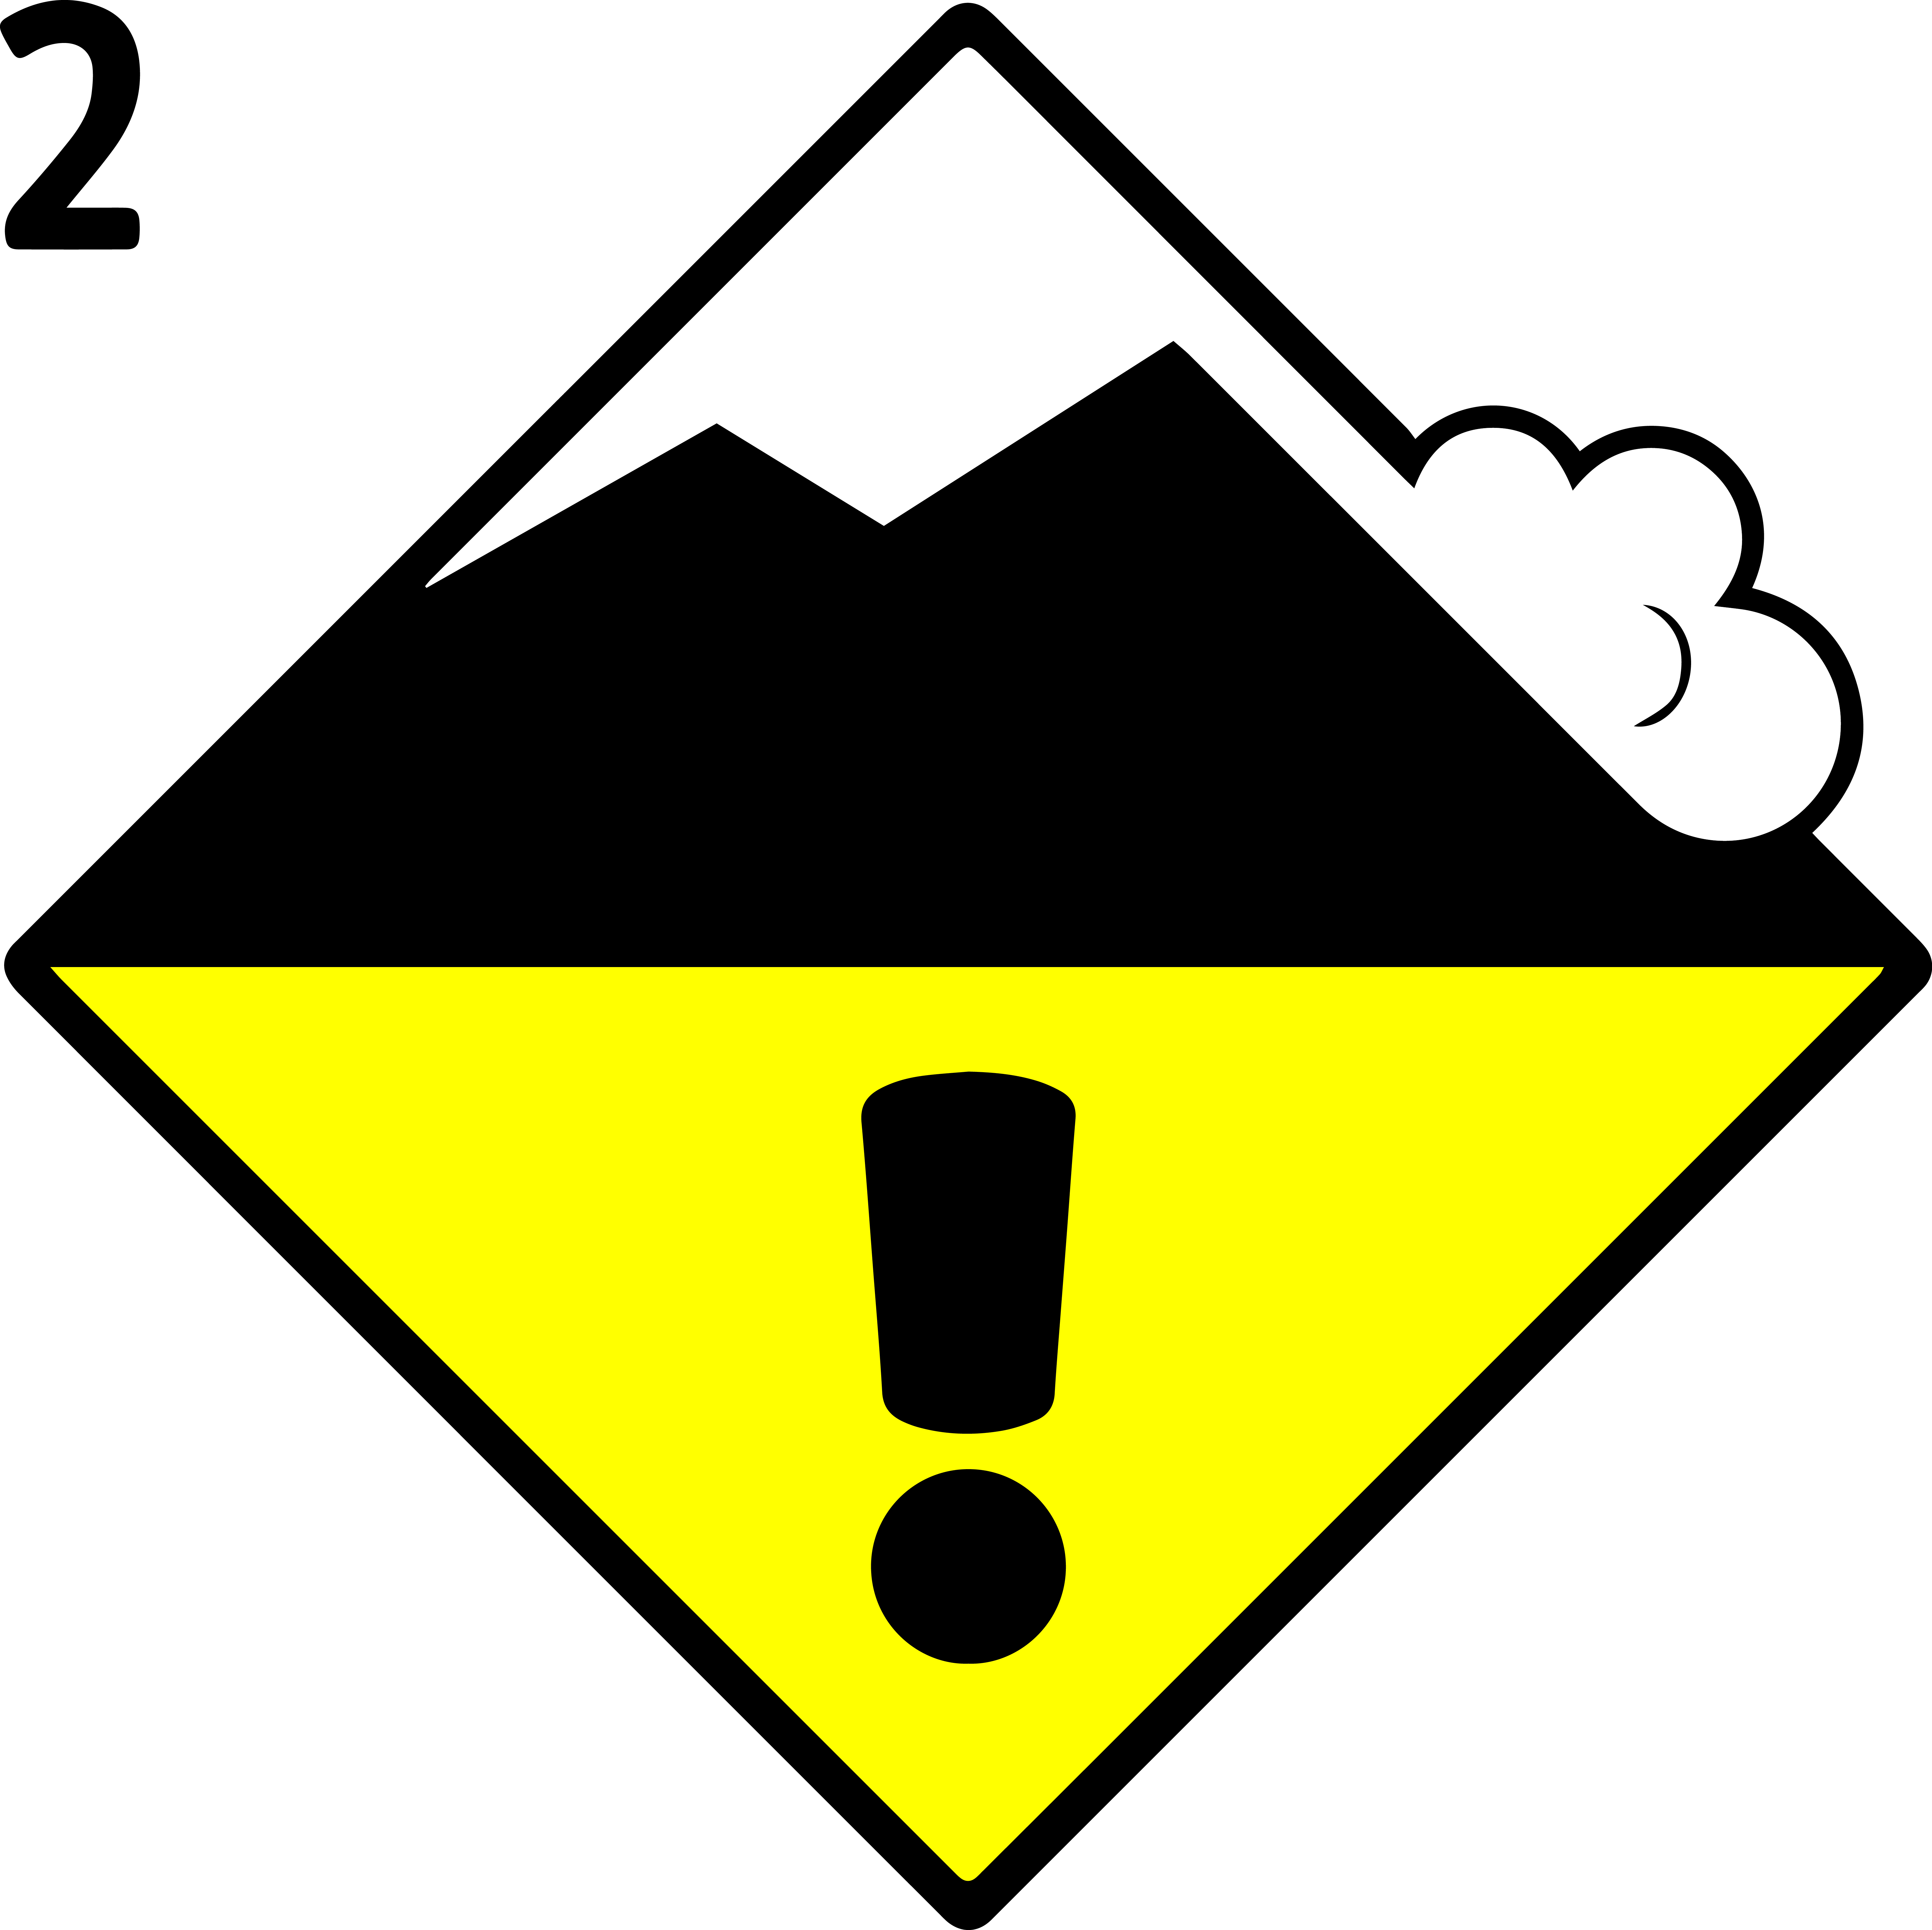 Download Avalanche Moderate Danger Level - Avalanche Danger Icon PNG Image  with No Background 